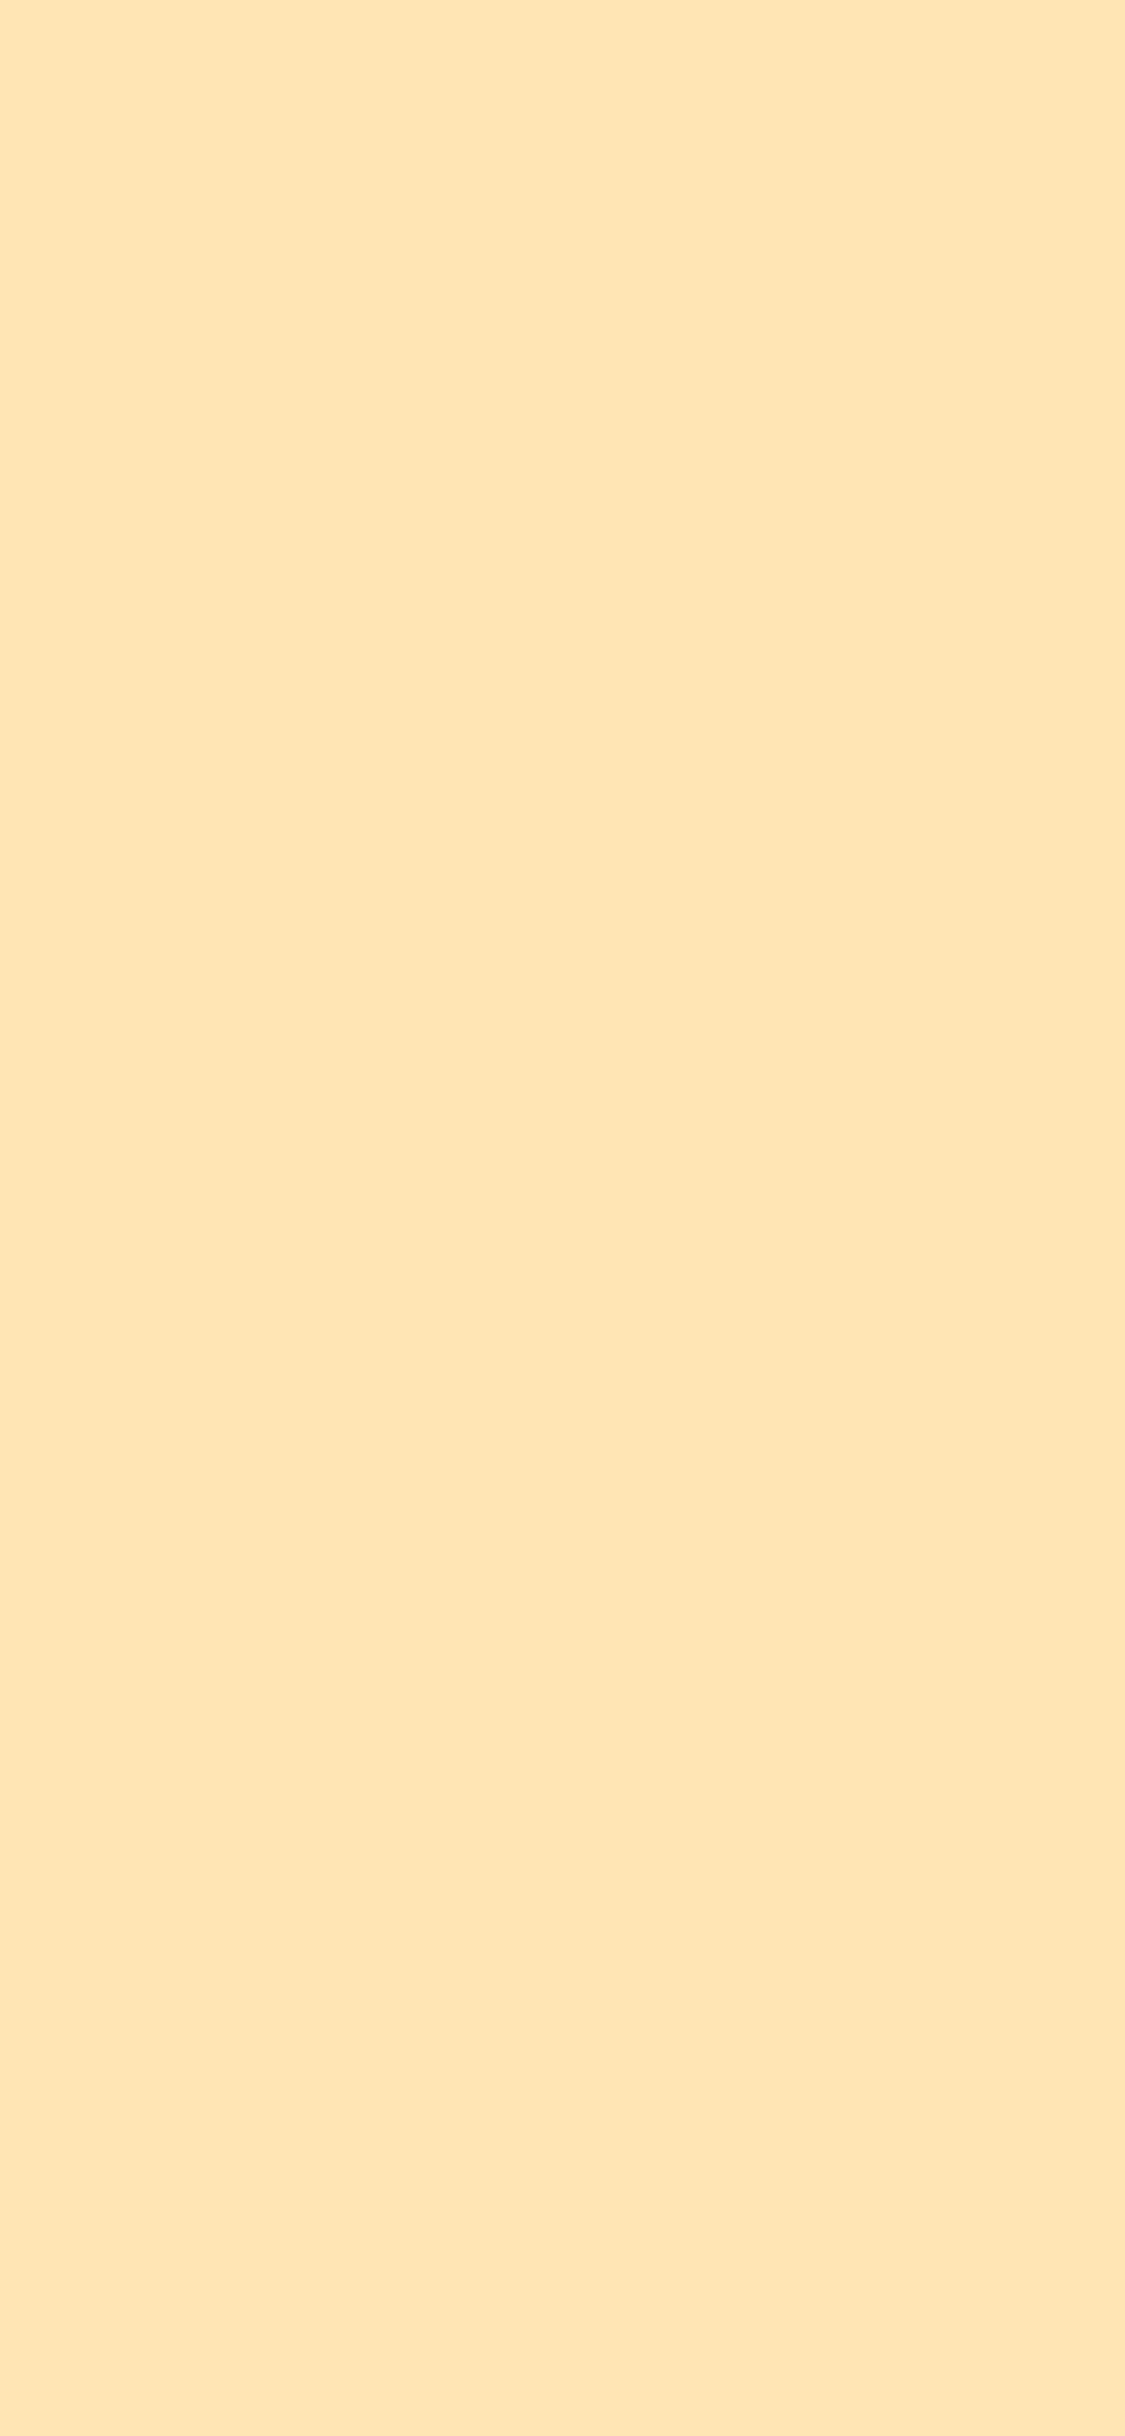 1125x2436 Peach Solid Color Background